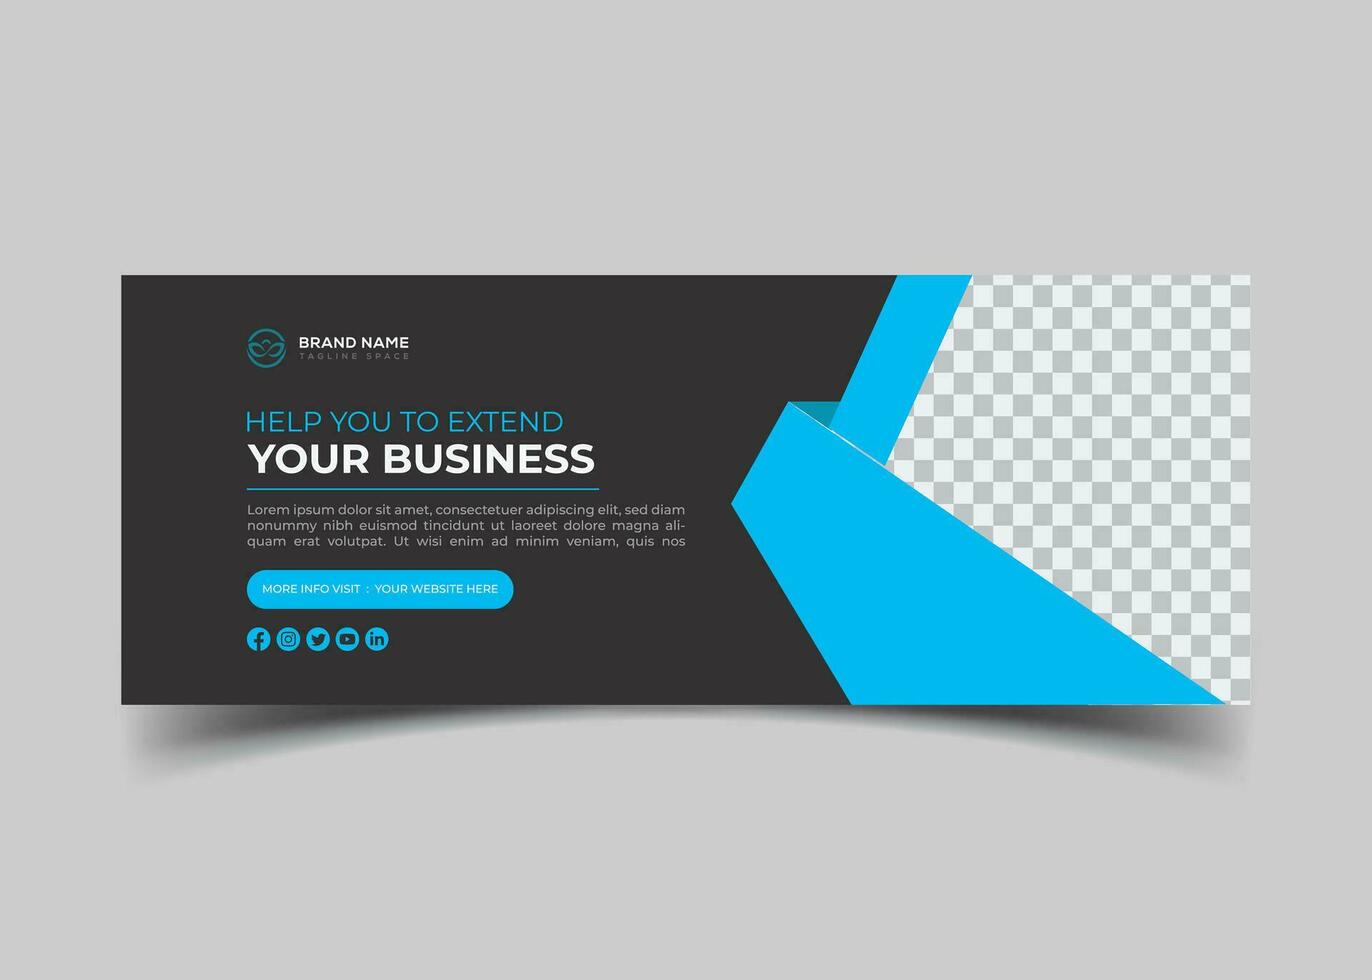 digital marketing agency and creative corporate Facebook cover design vector